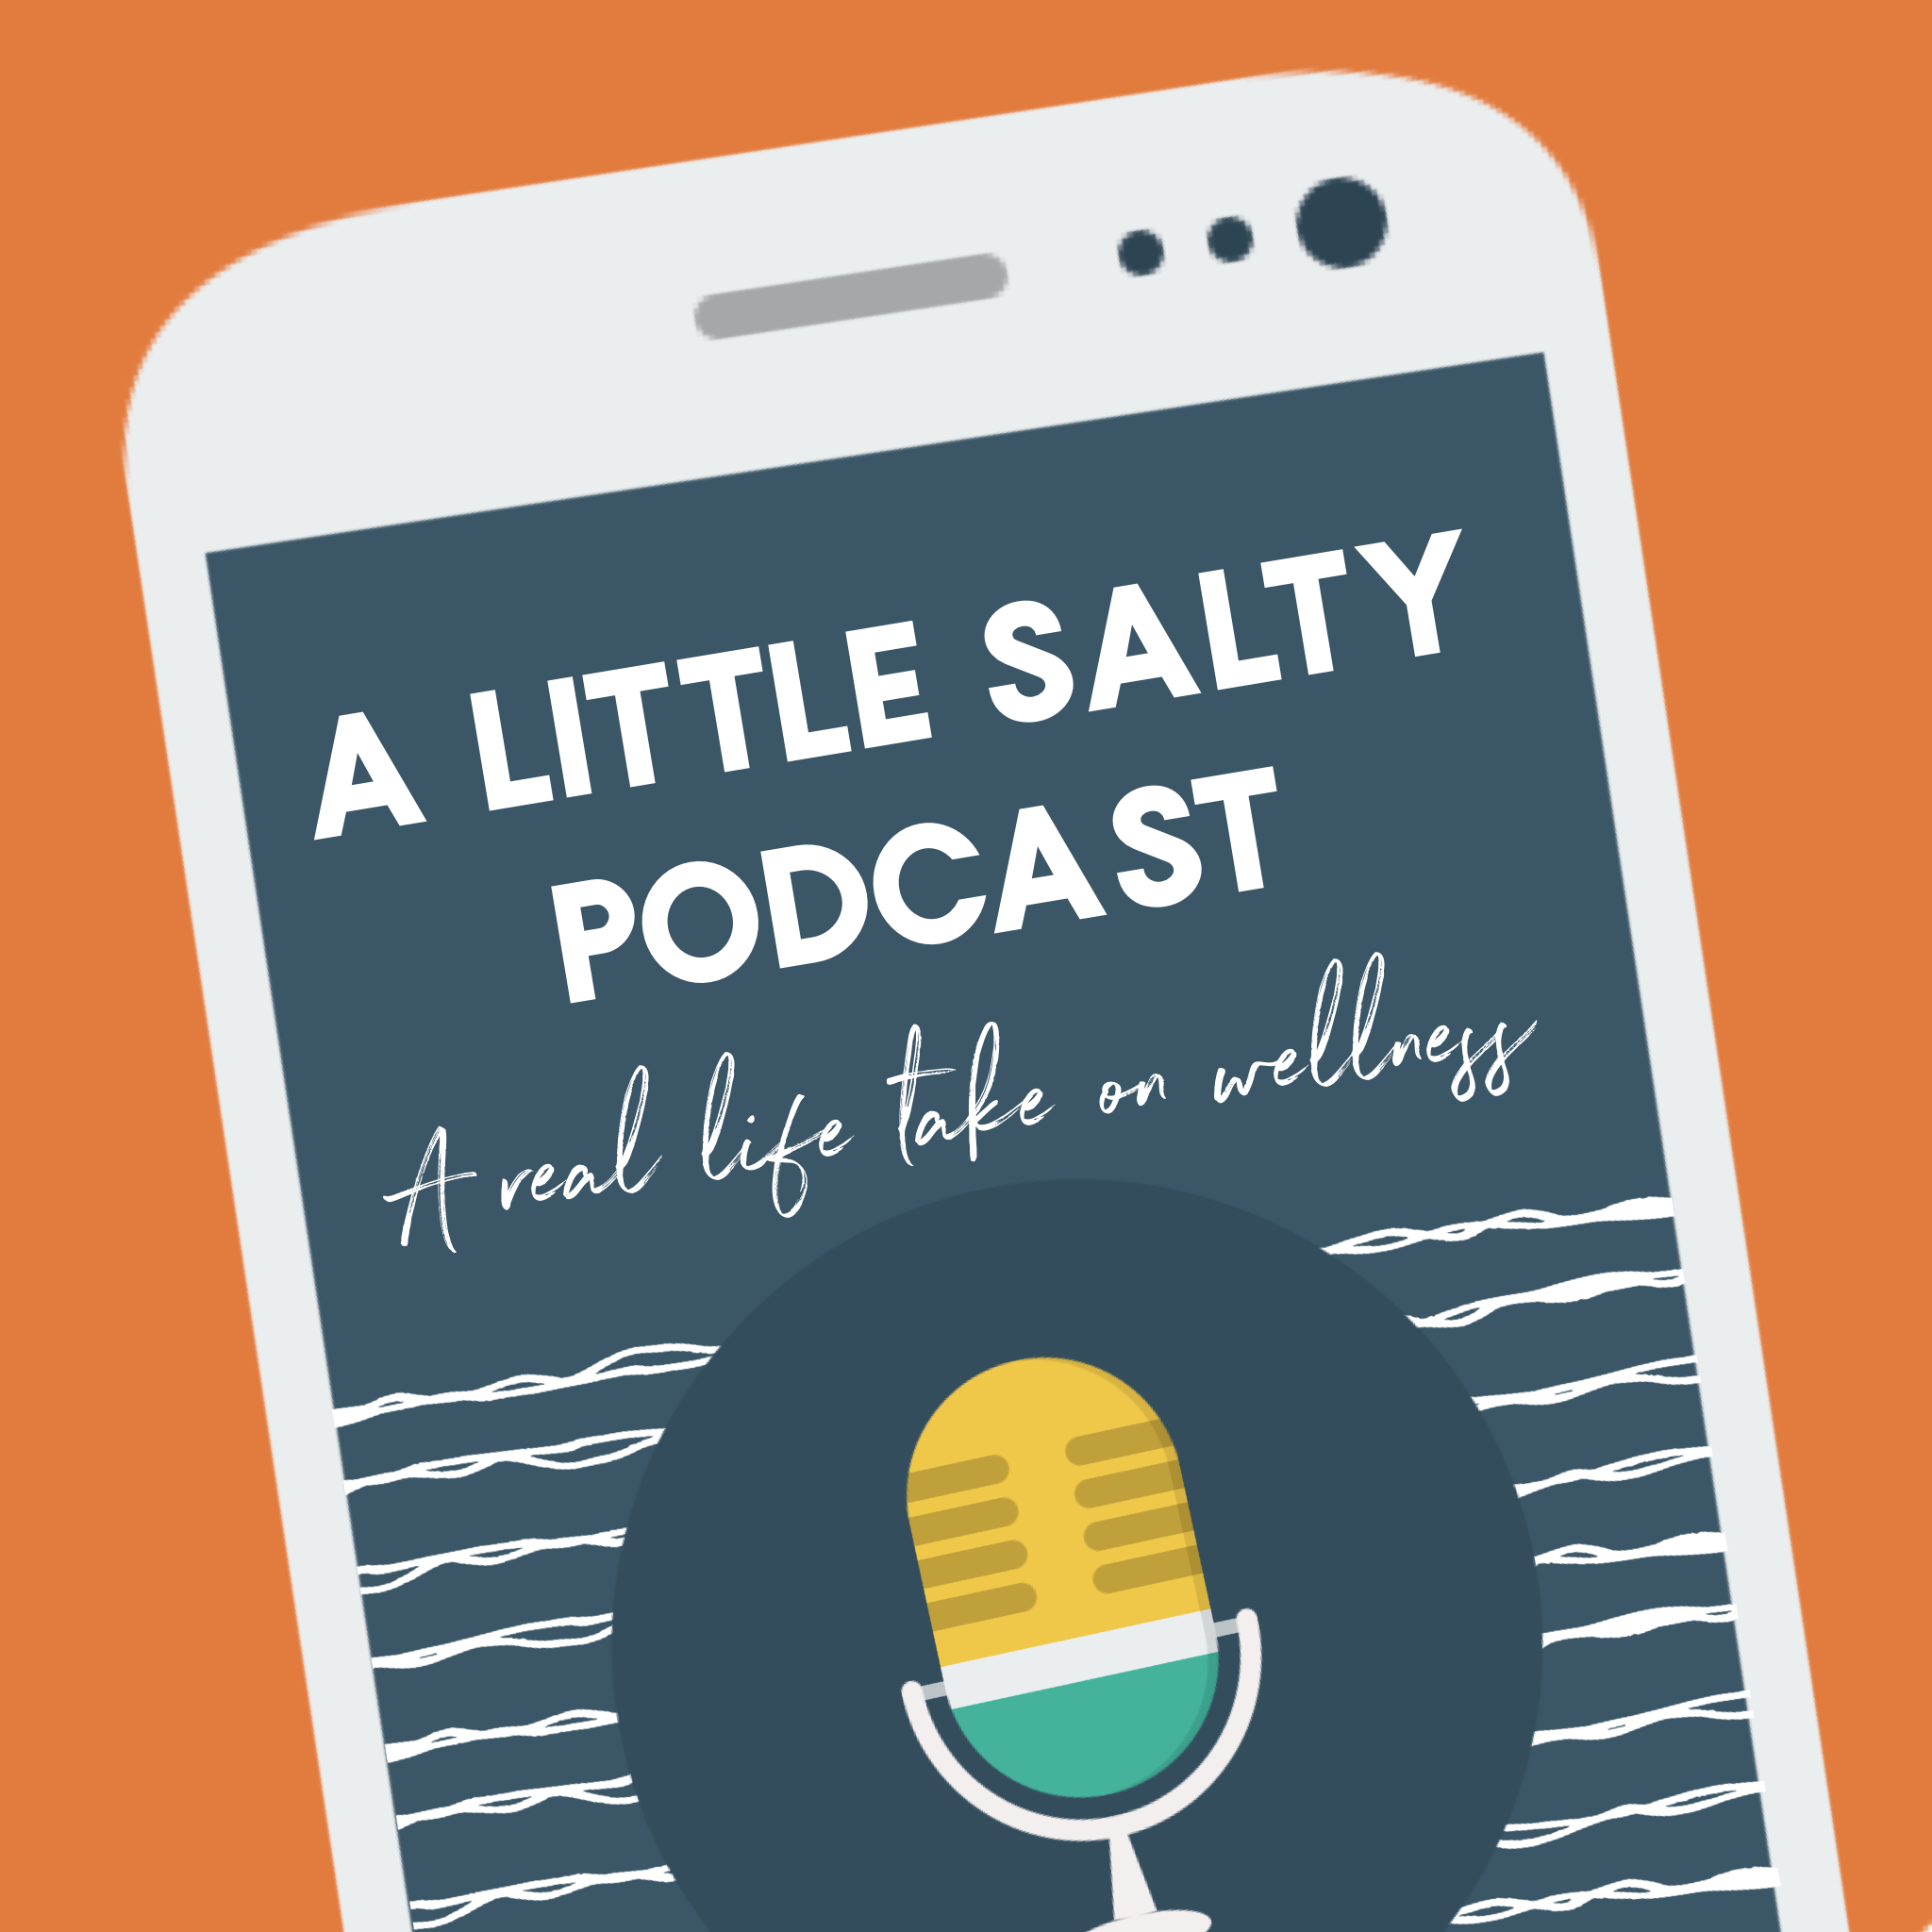 A little salty podcast